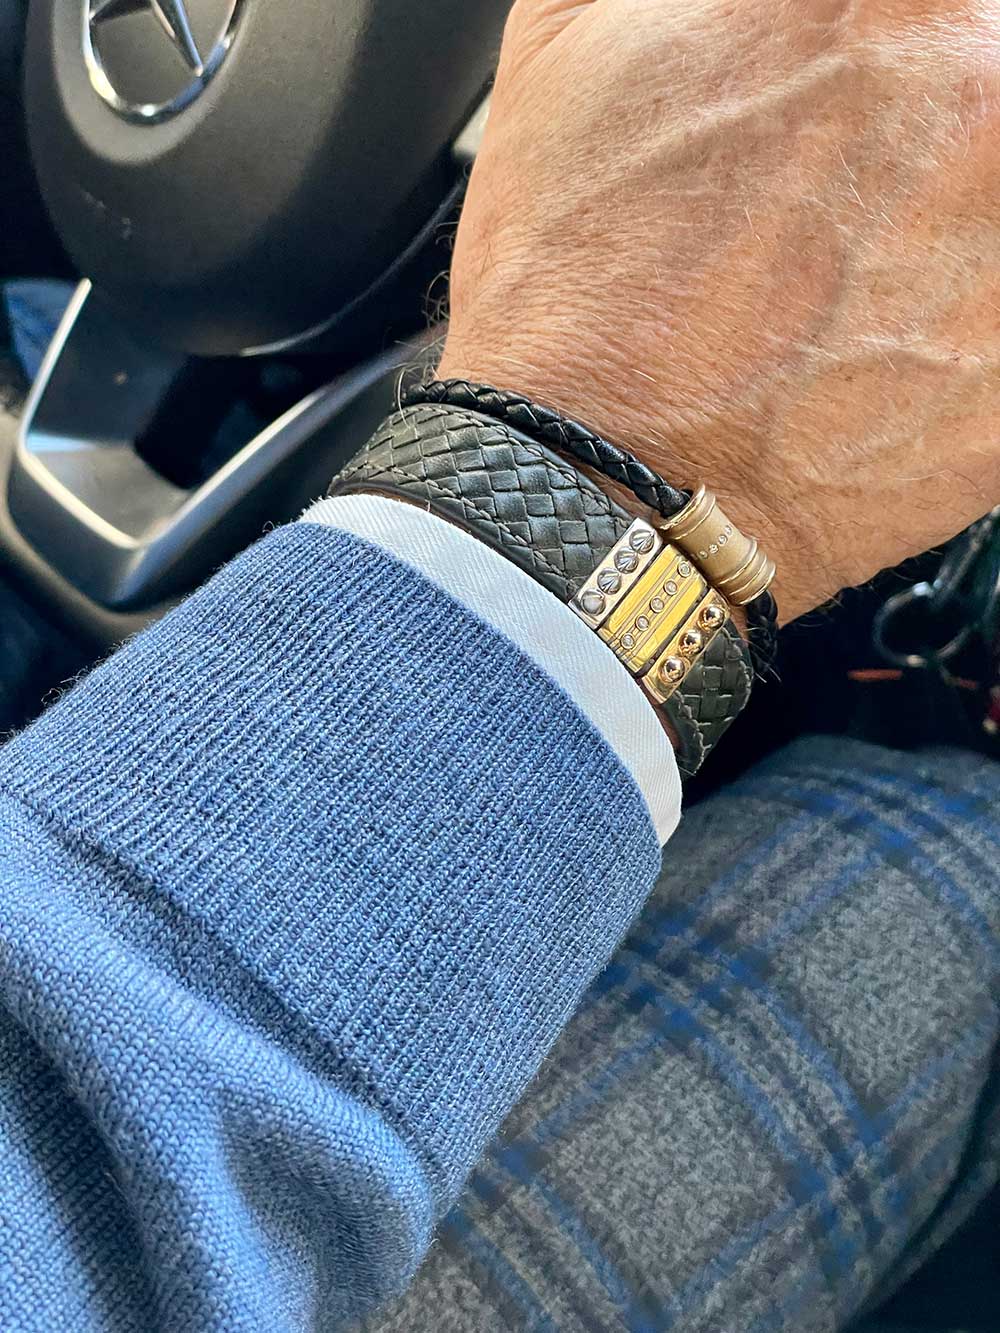 Mr. Grey - Heavy solid gold and leather bracelet